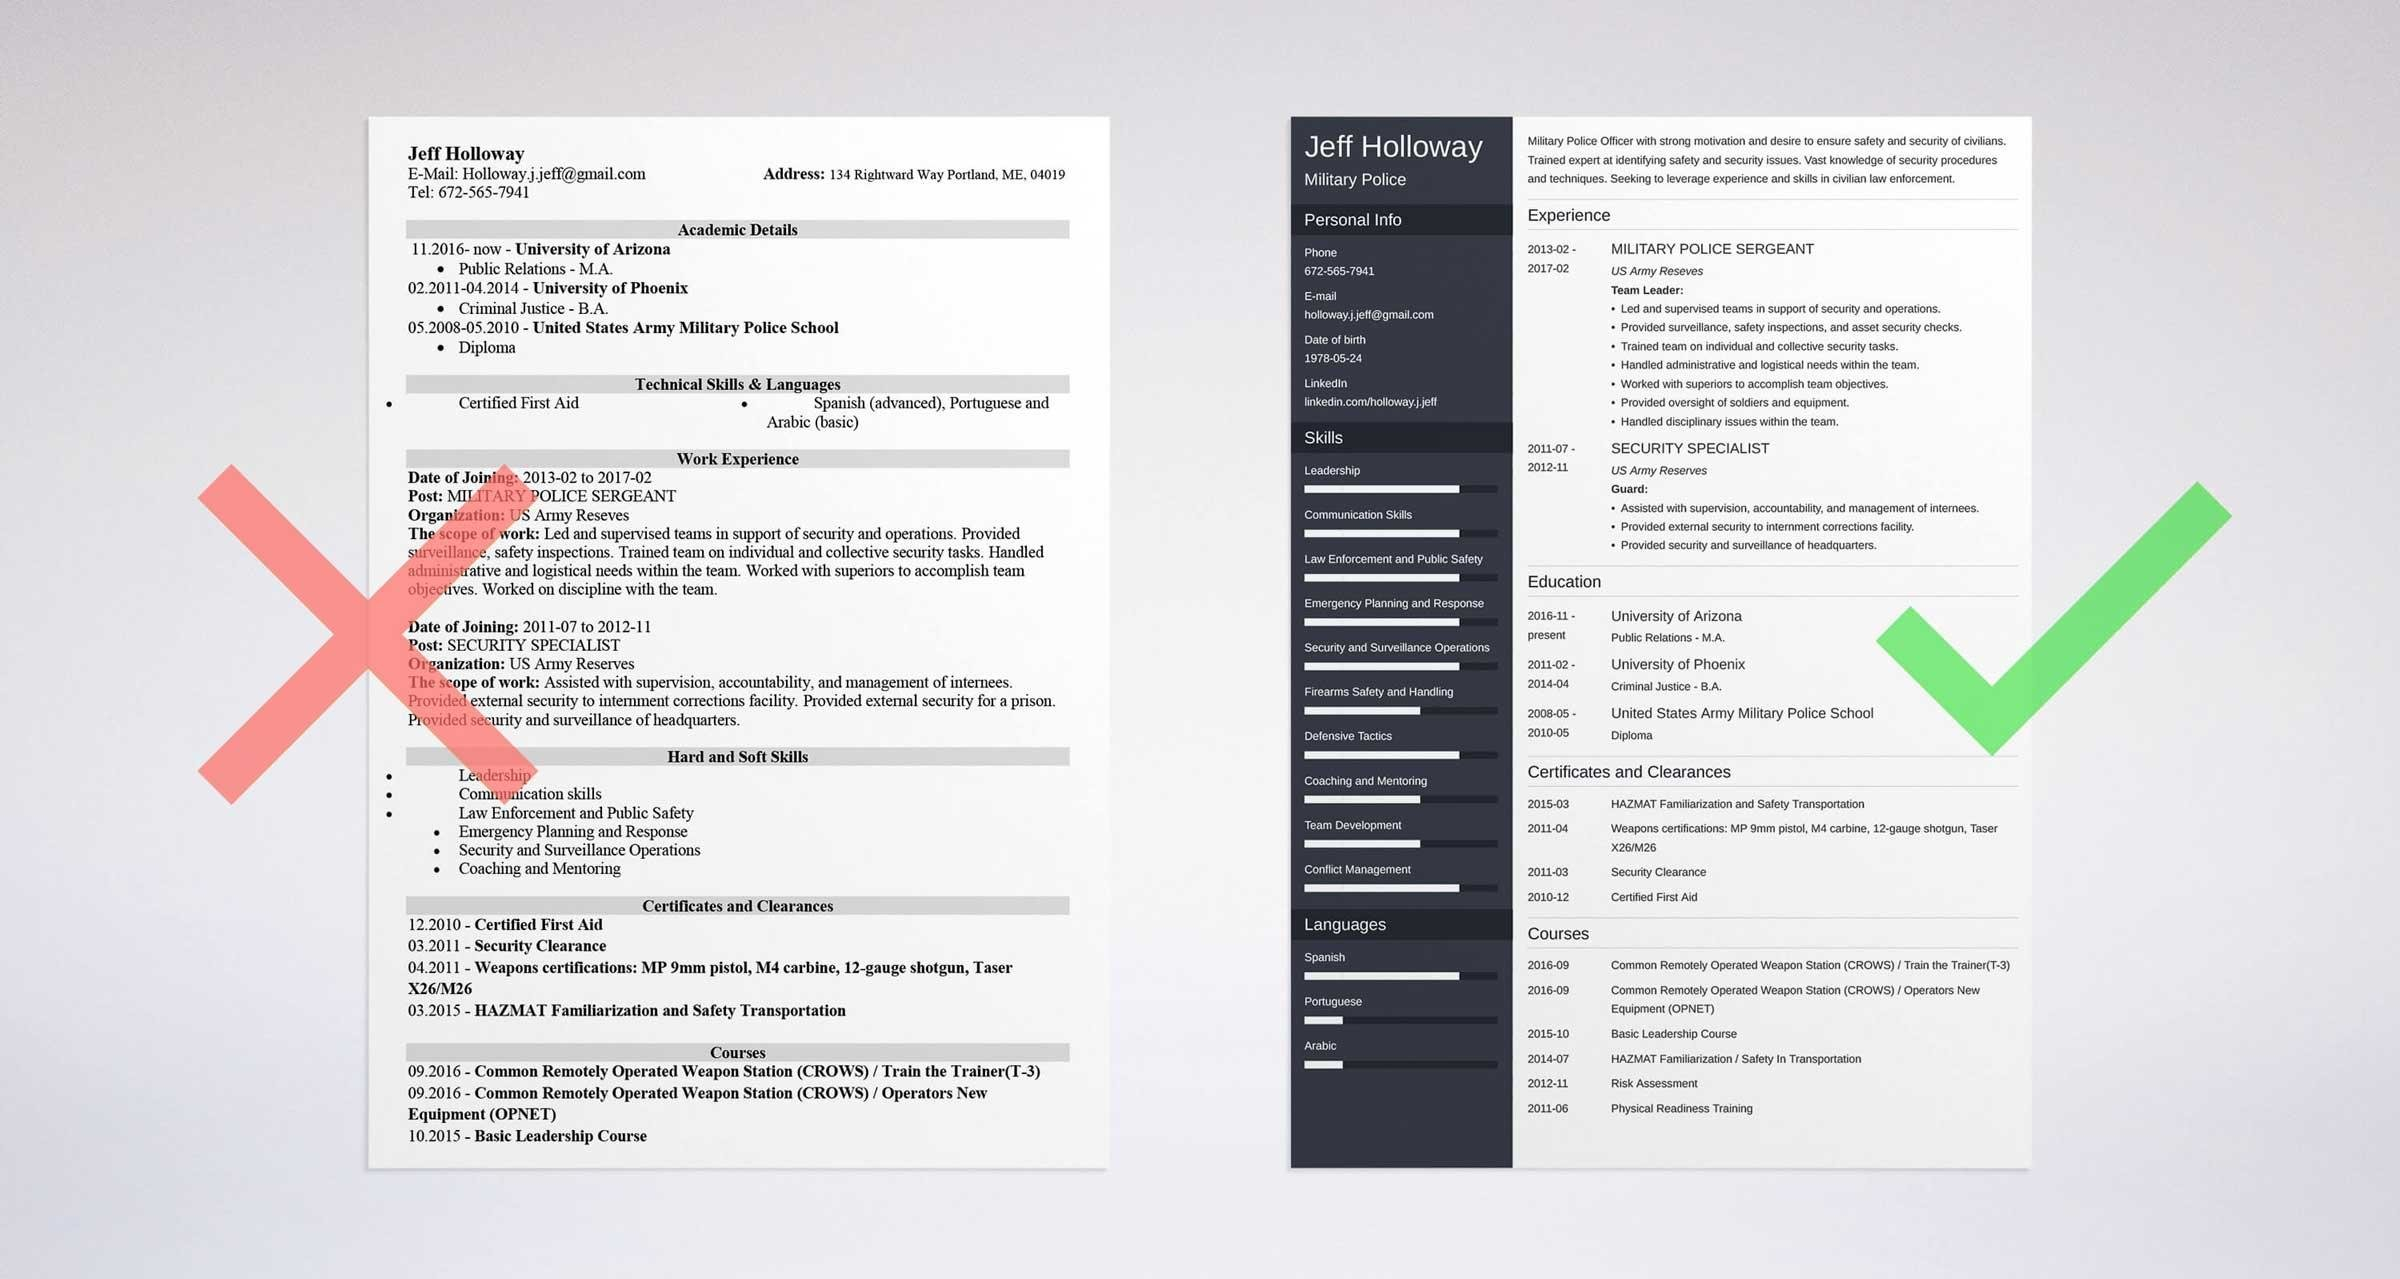 Military To Civilian Resume Examples Template For Veterans in proportions 2400 X 1279